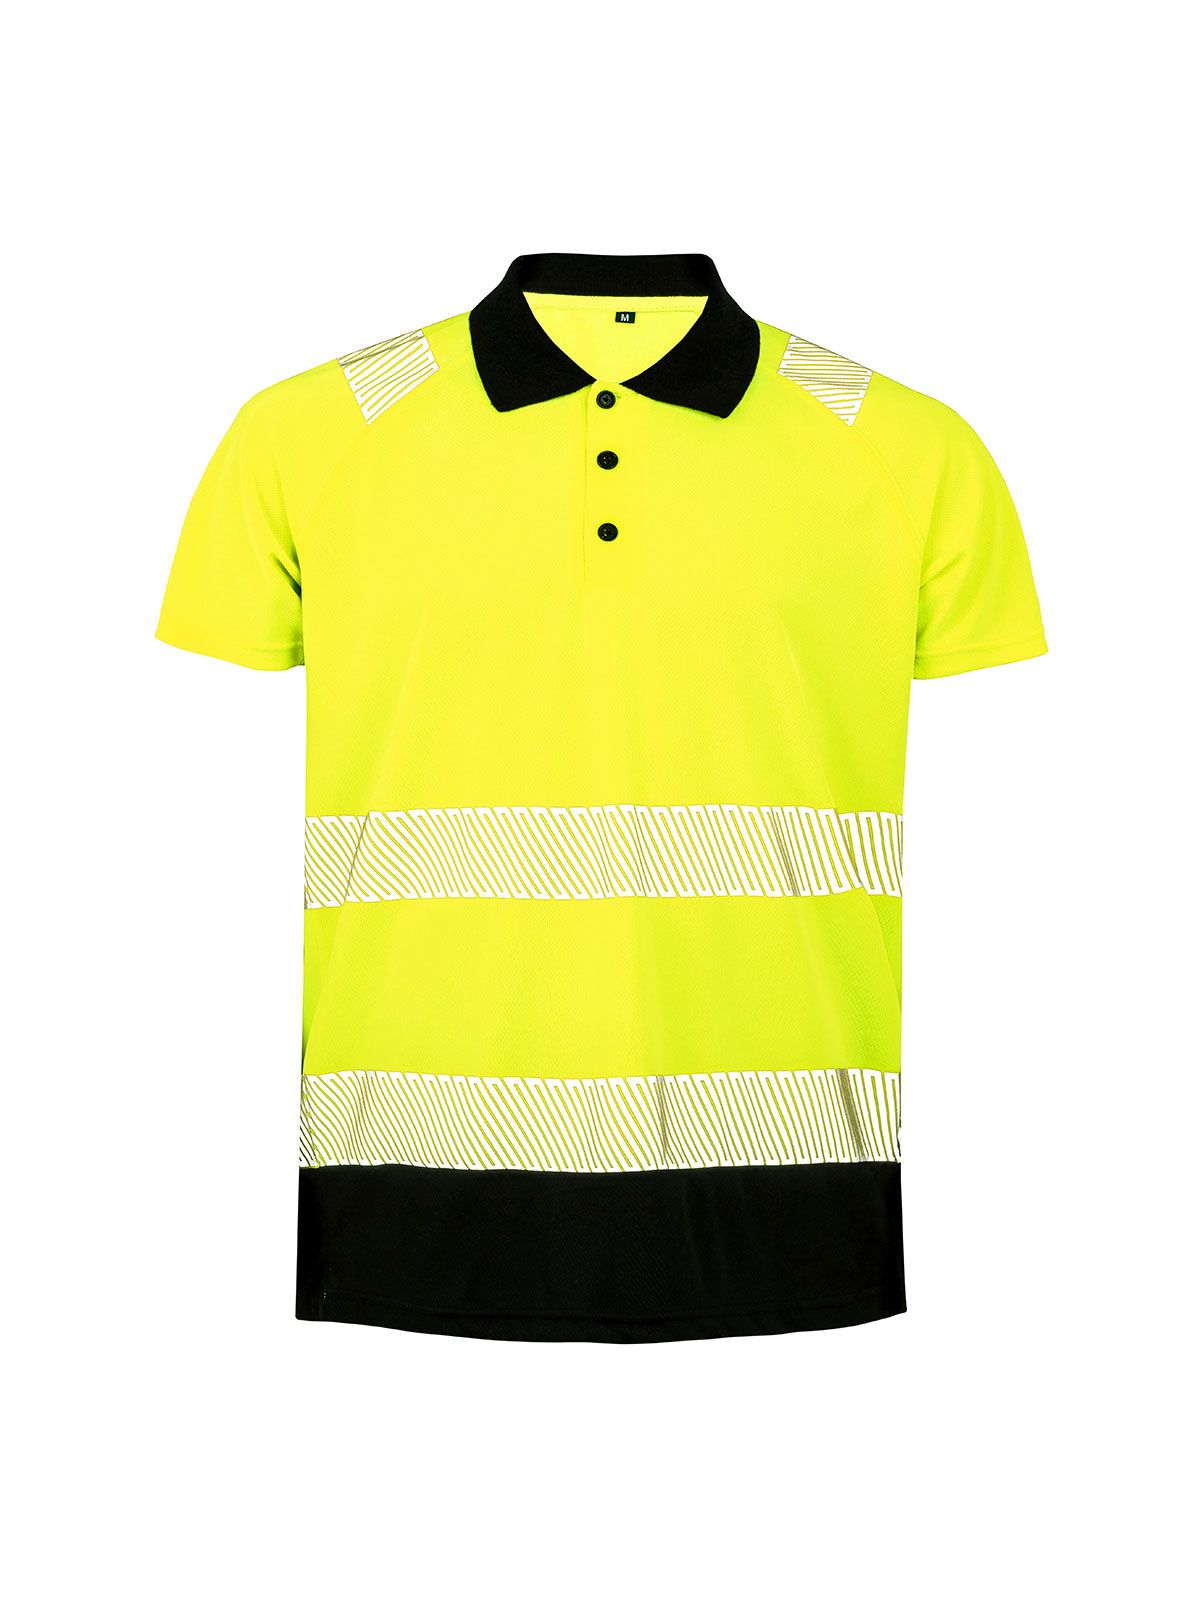 recycled-safety-polo-shirt-yellow-black.webp